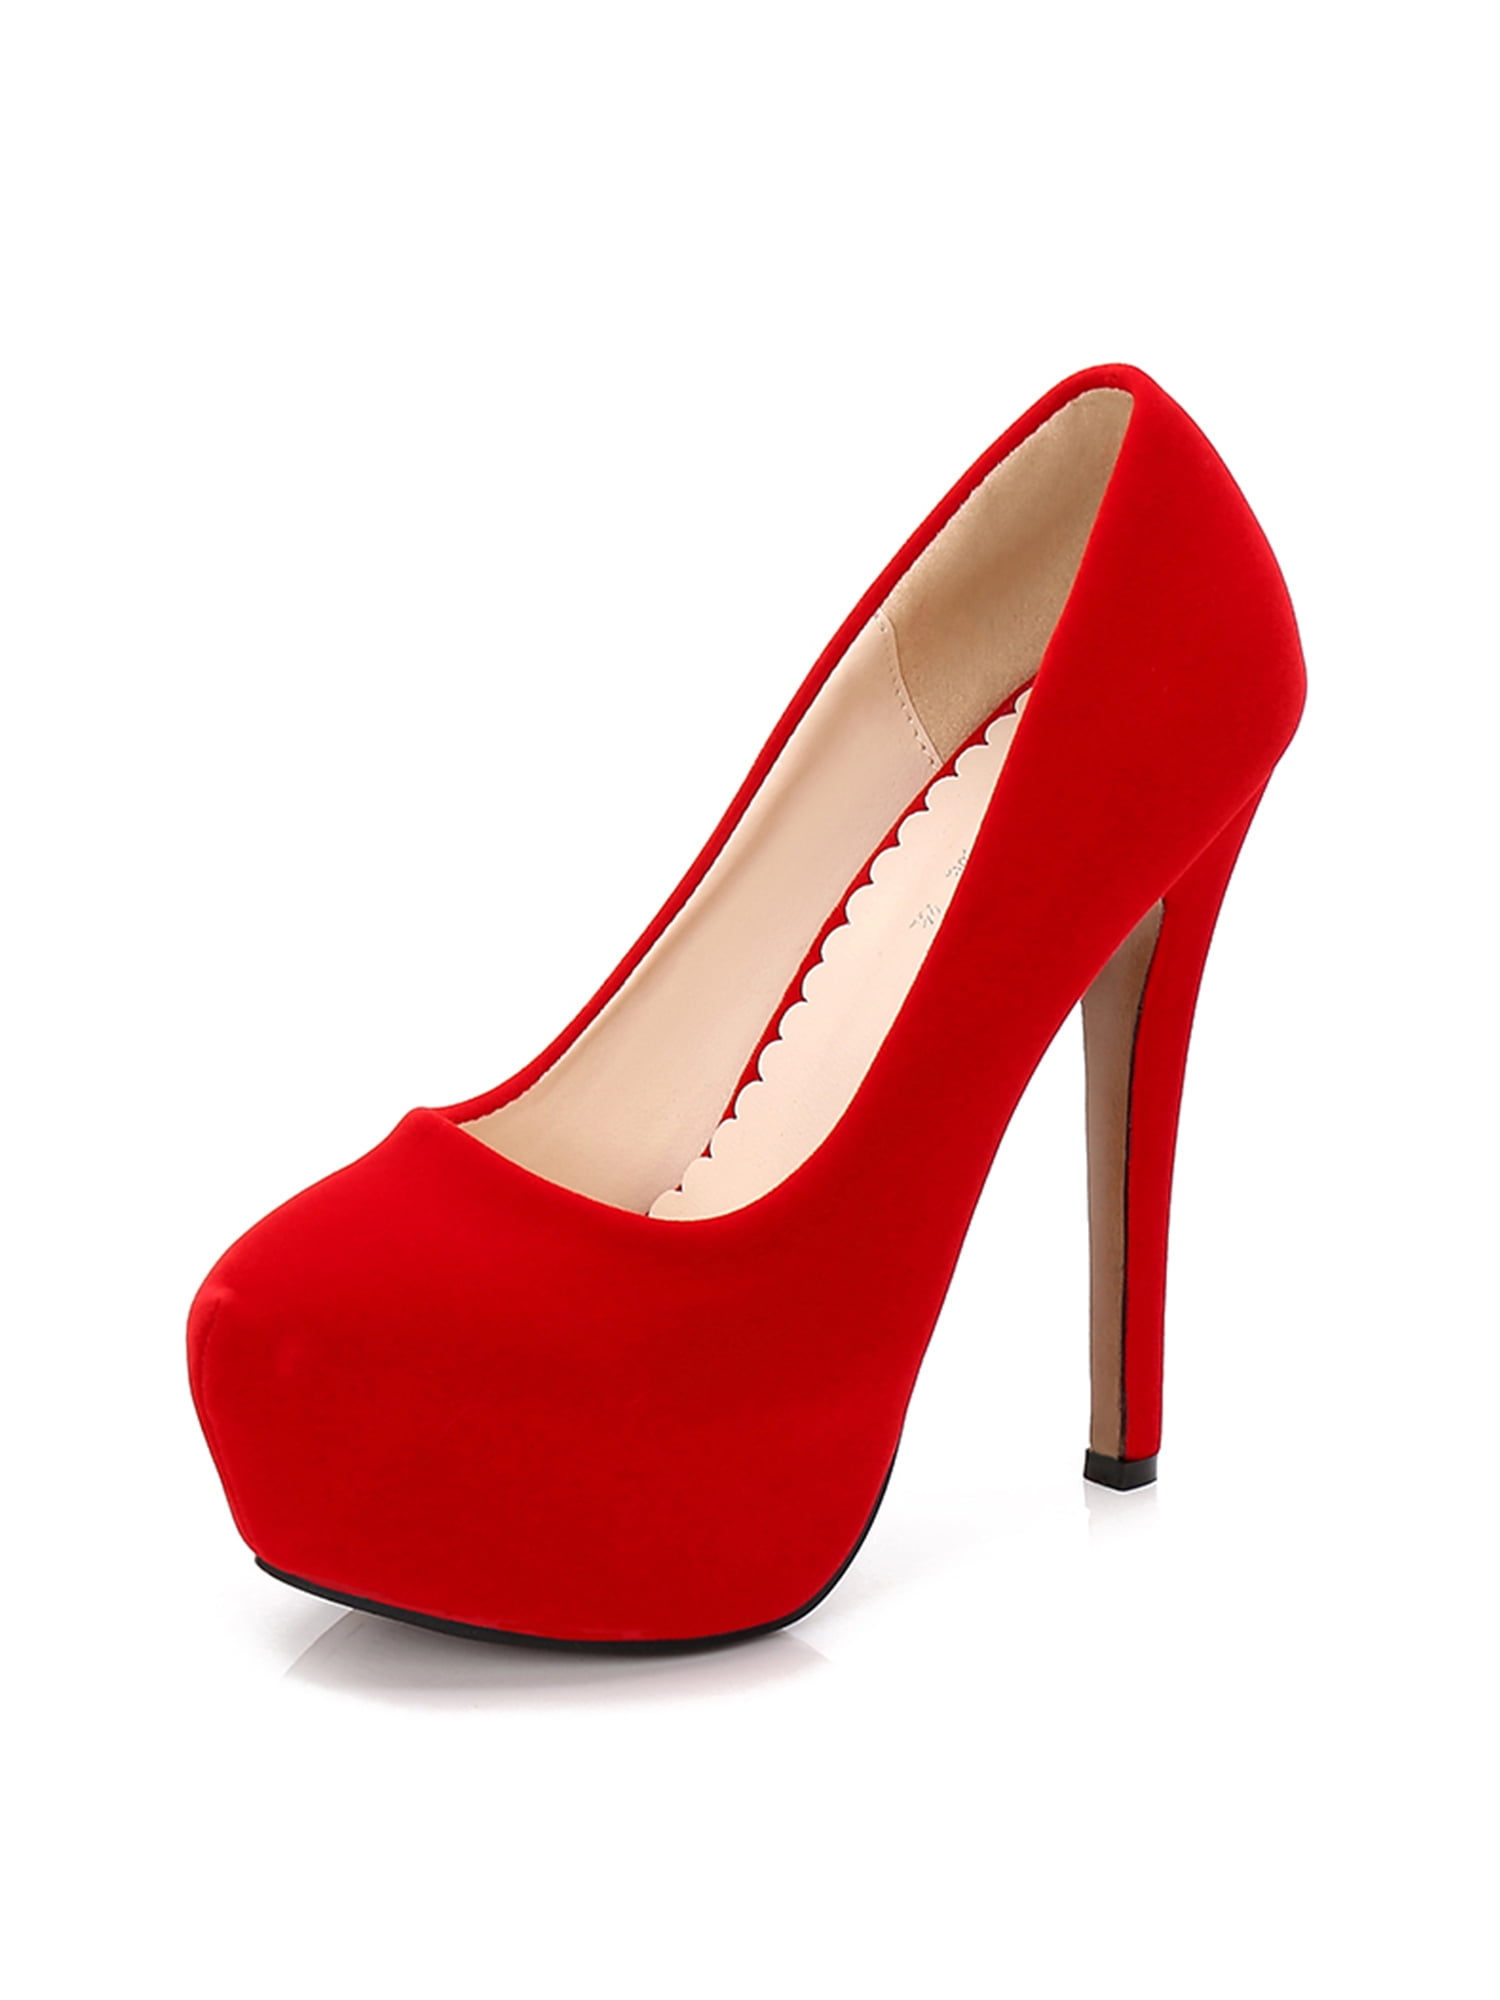 50 Best High Heels Quotes with Pics